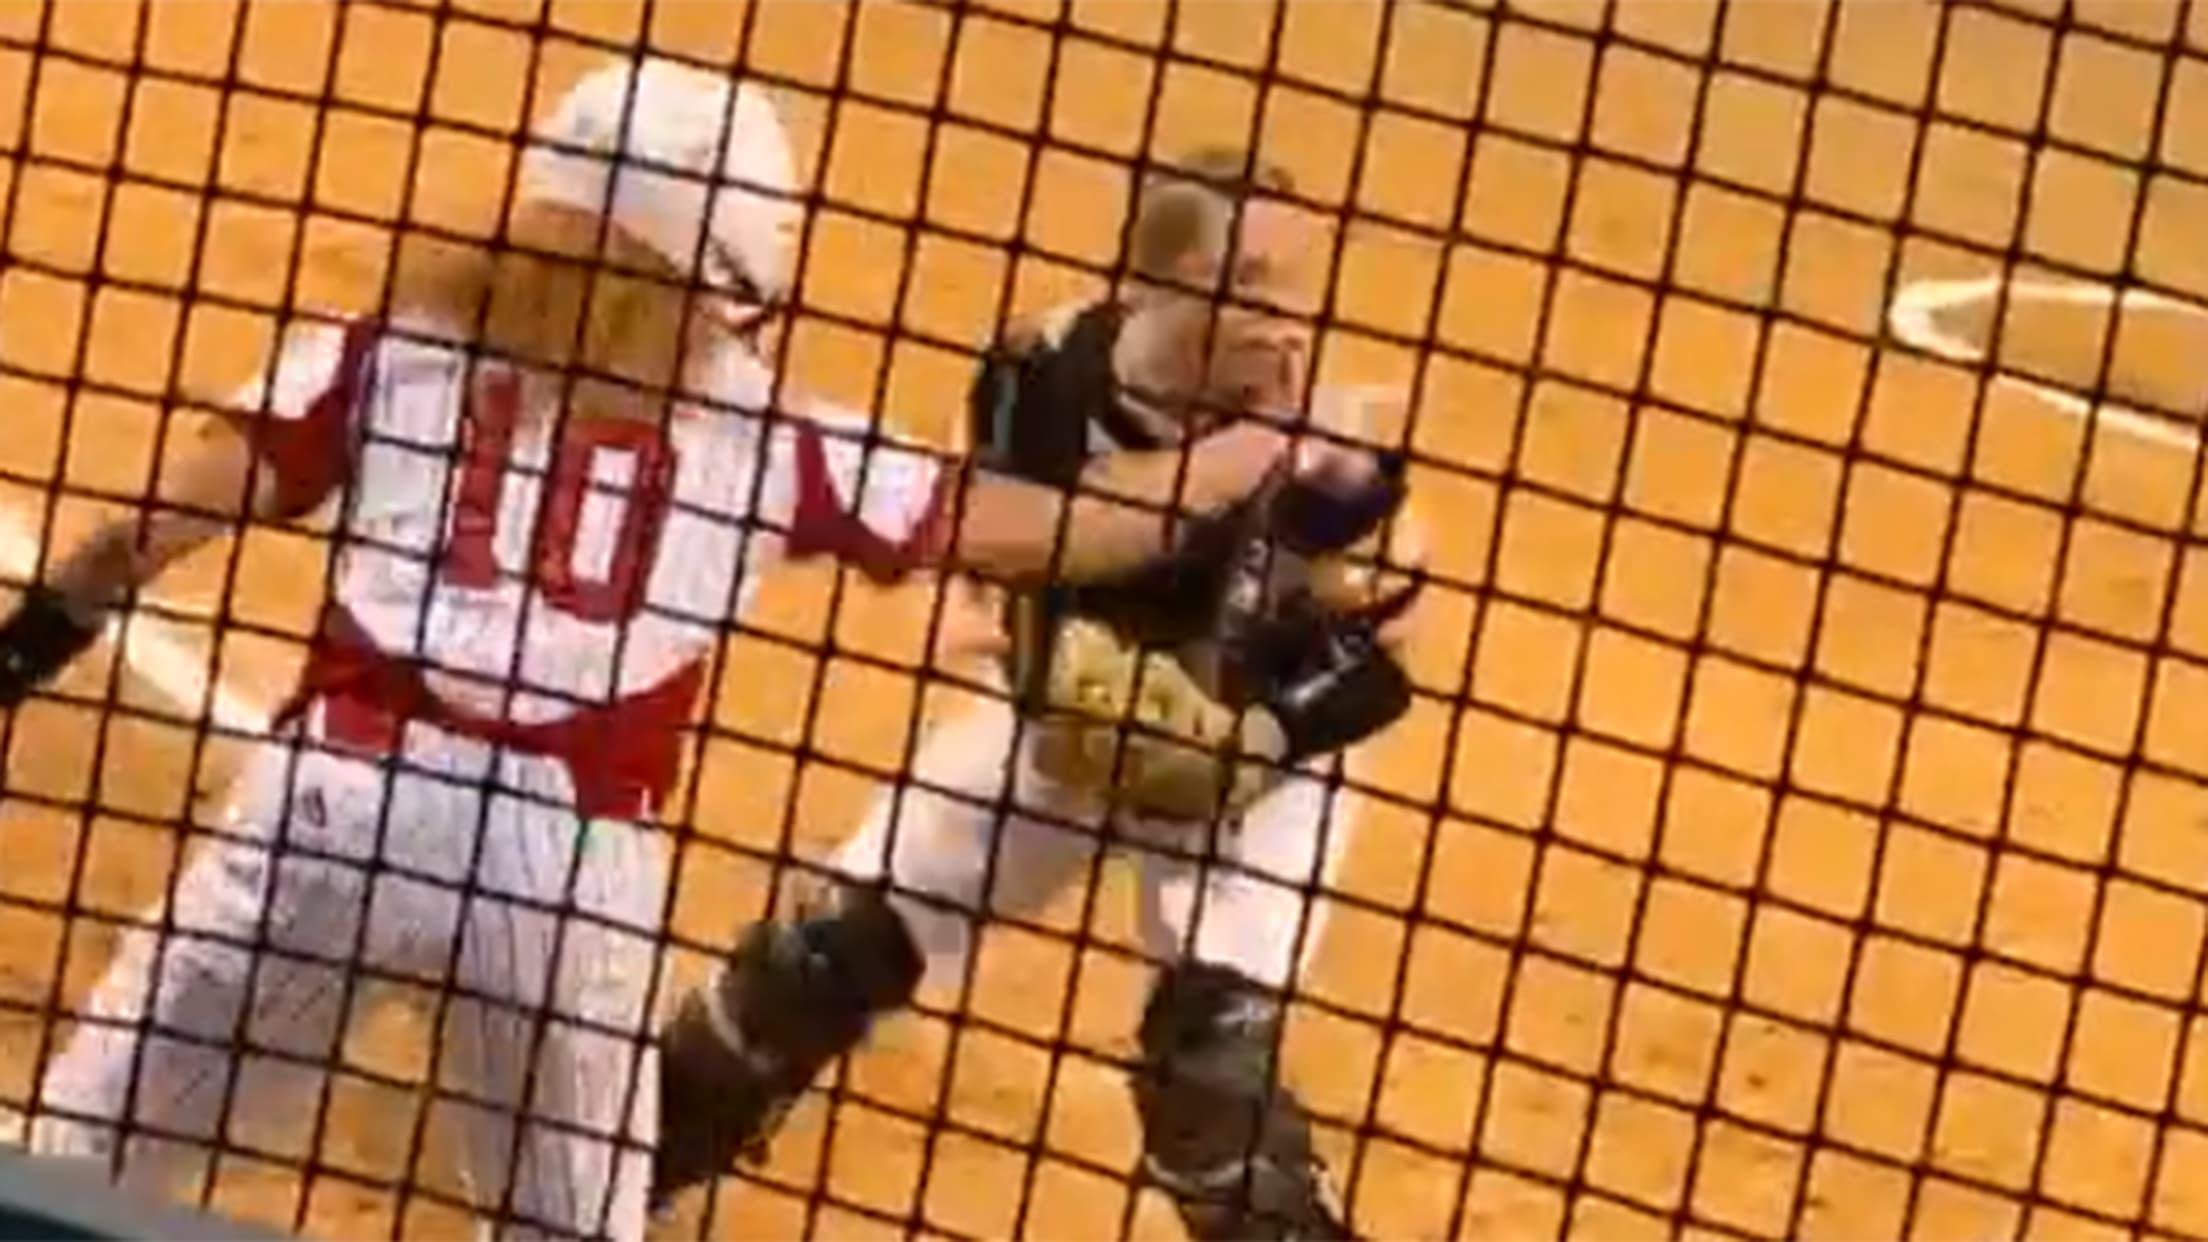 A video screengrab looking through a fence of a player wearing No. 10 pointing and the opposing catcher looking in that direction